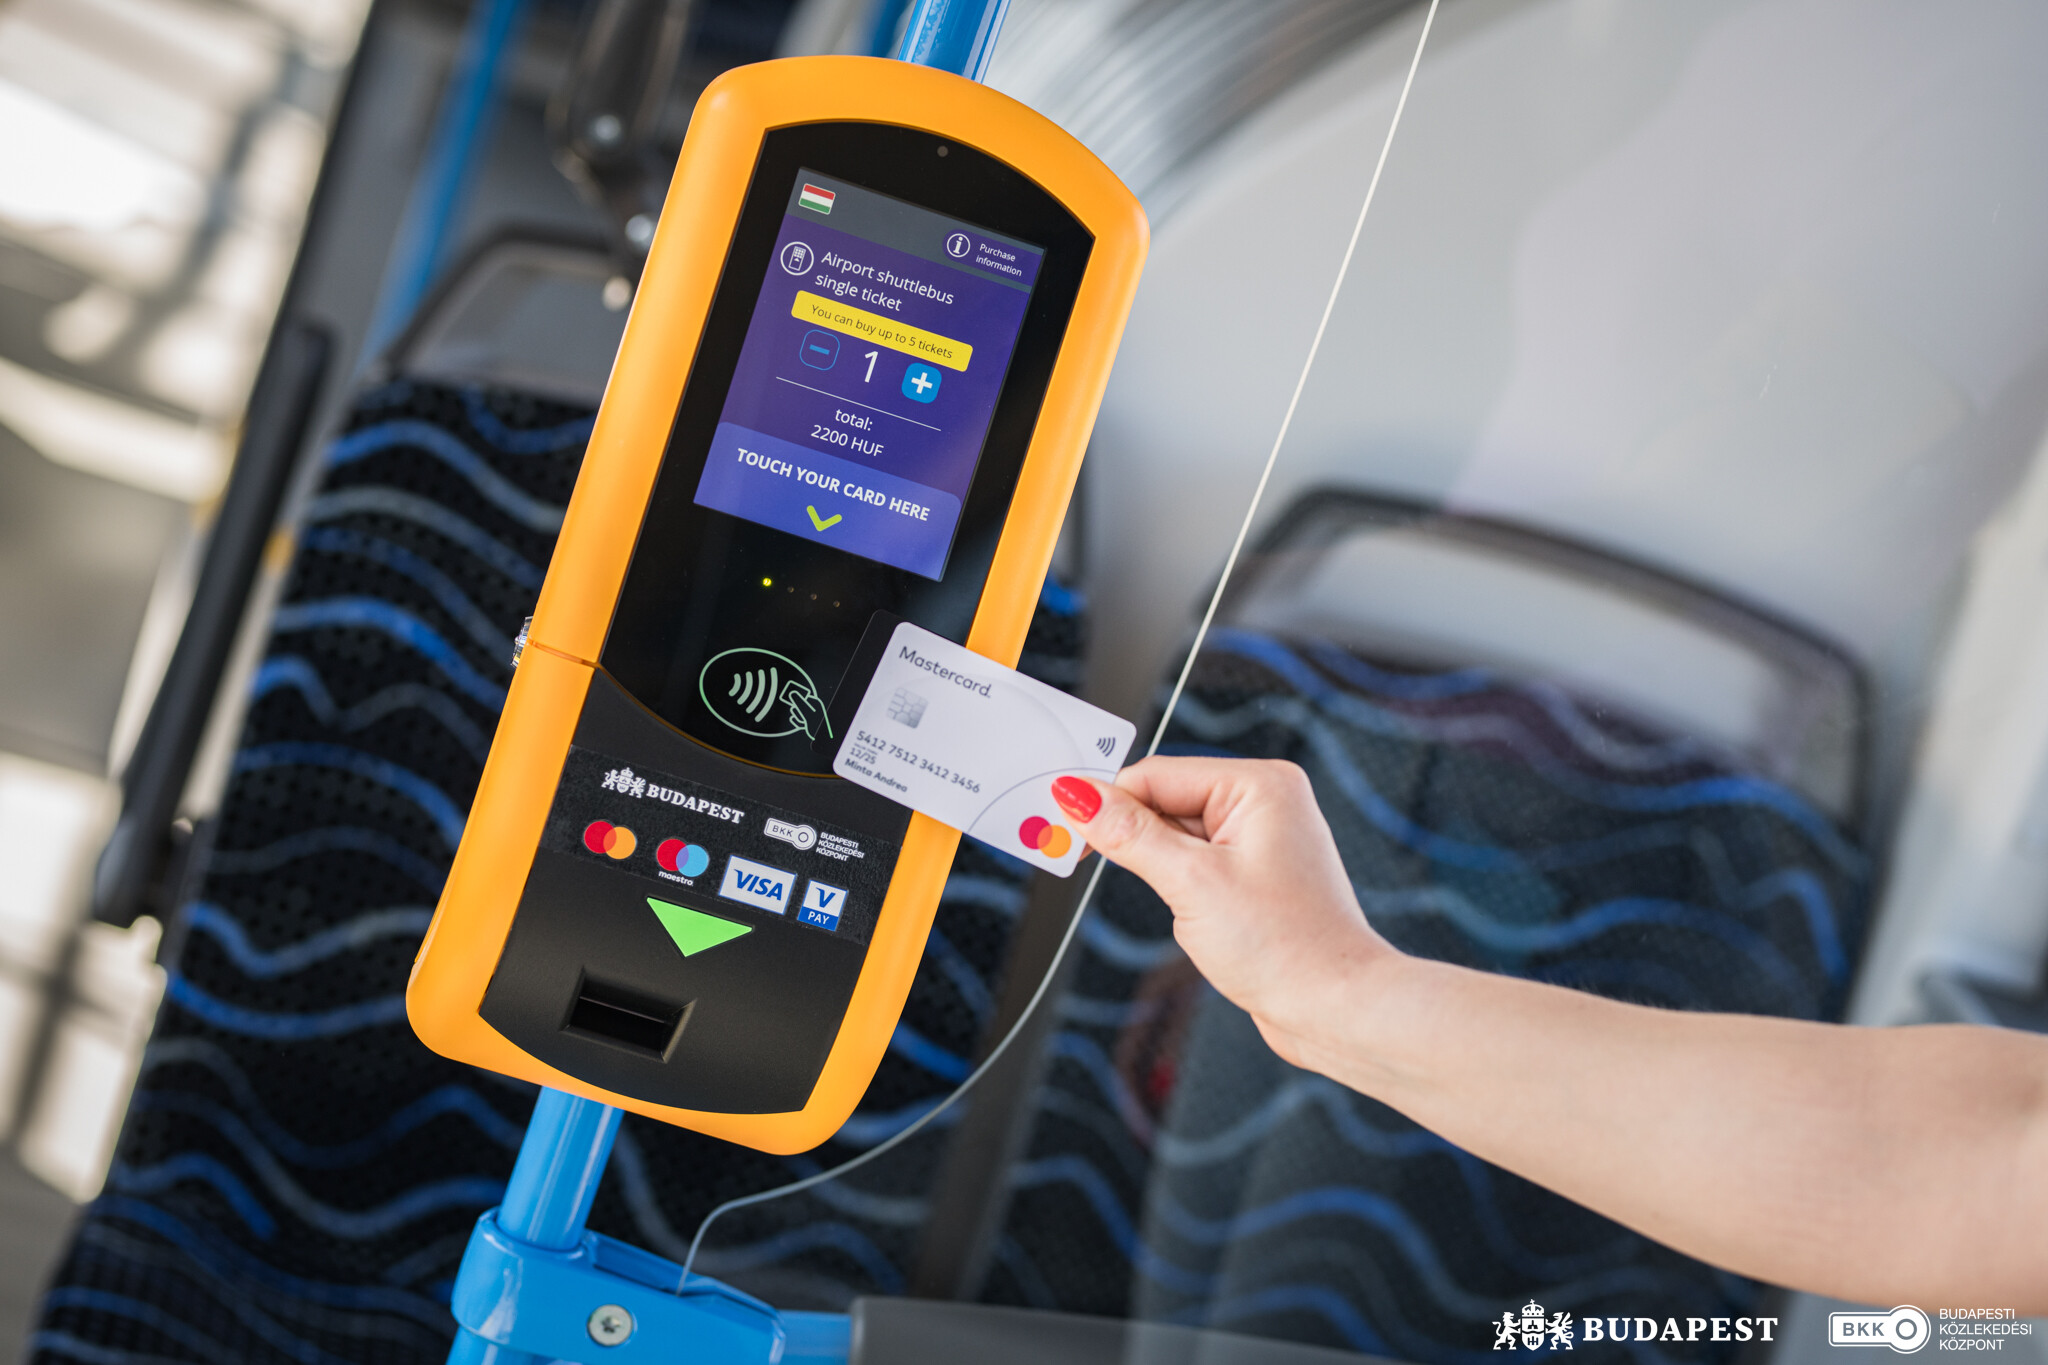 Budapest Pay&GO device with bankcard